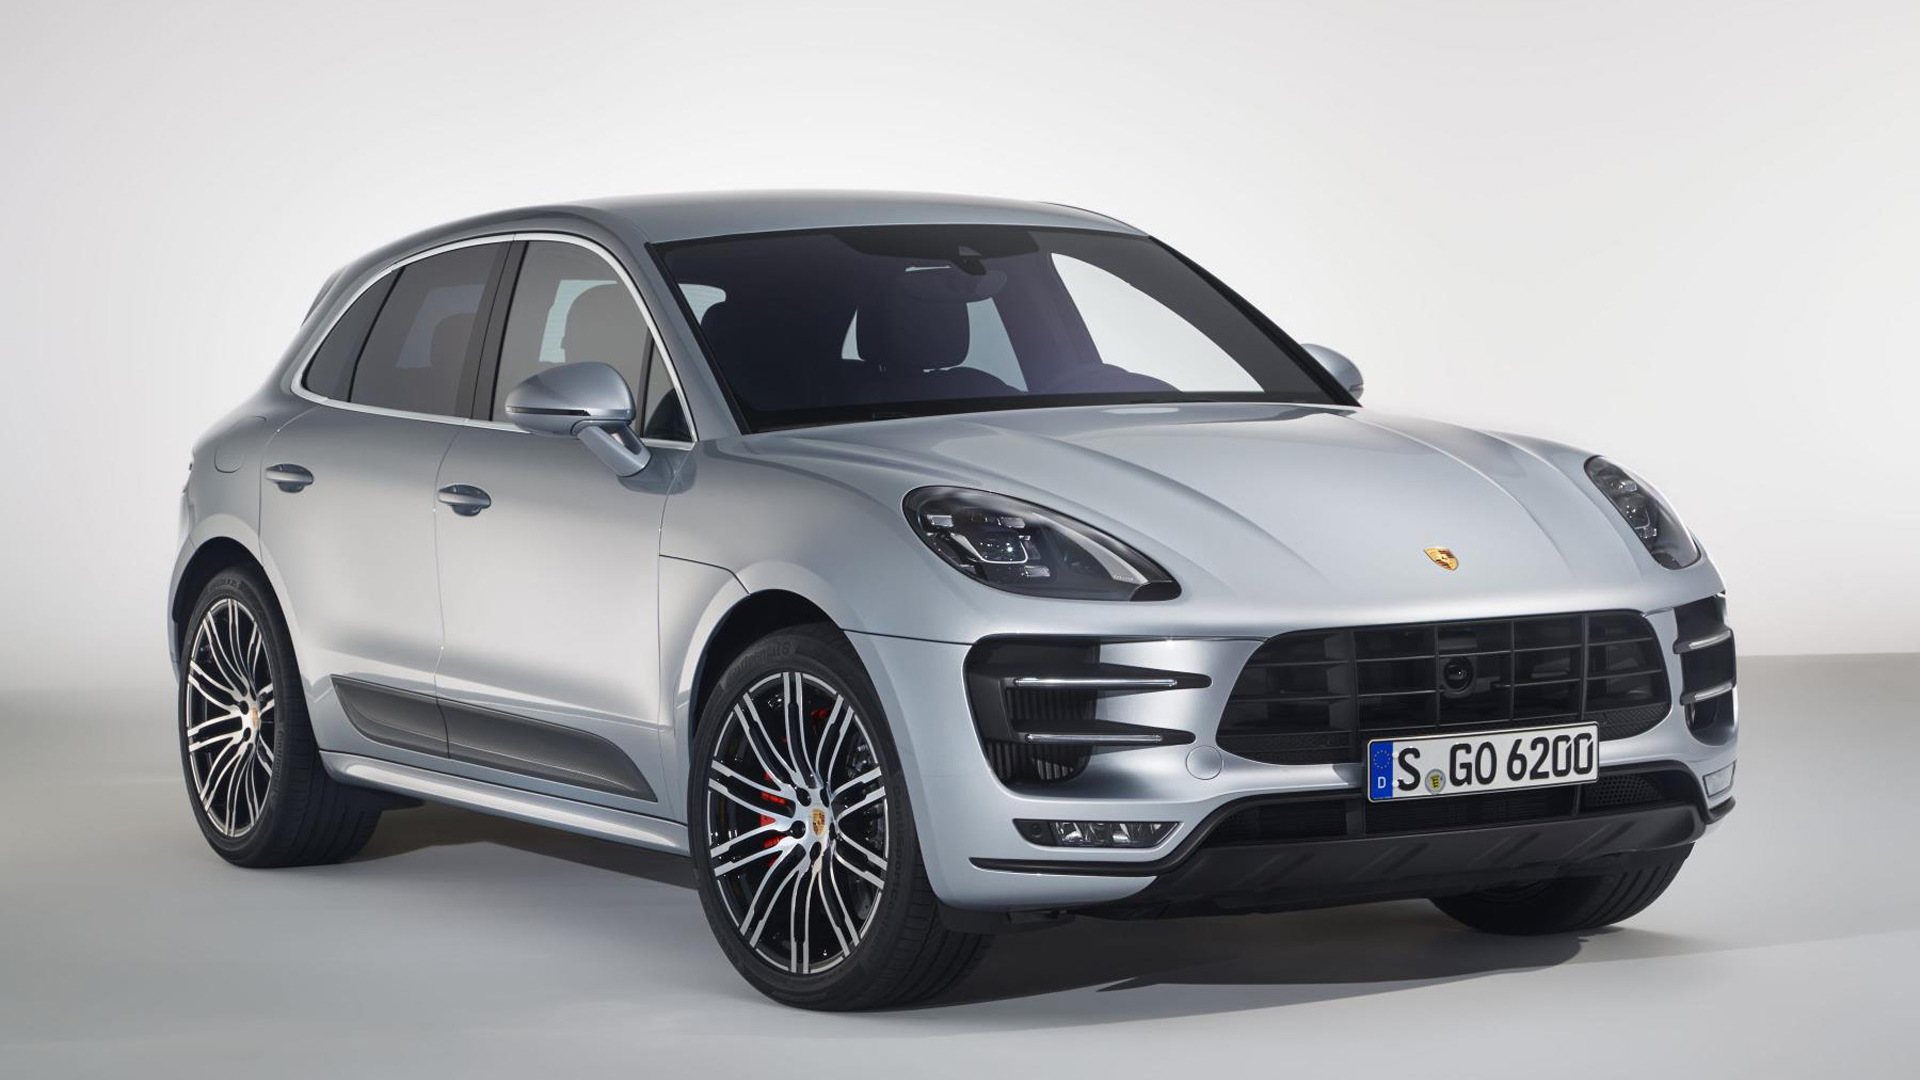 2017 Porsche Macan Turbo equipped with Performance Package